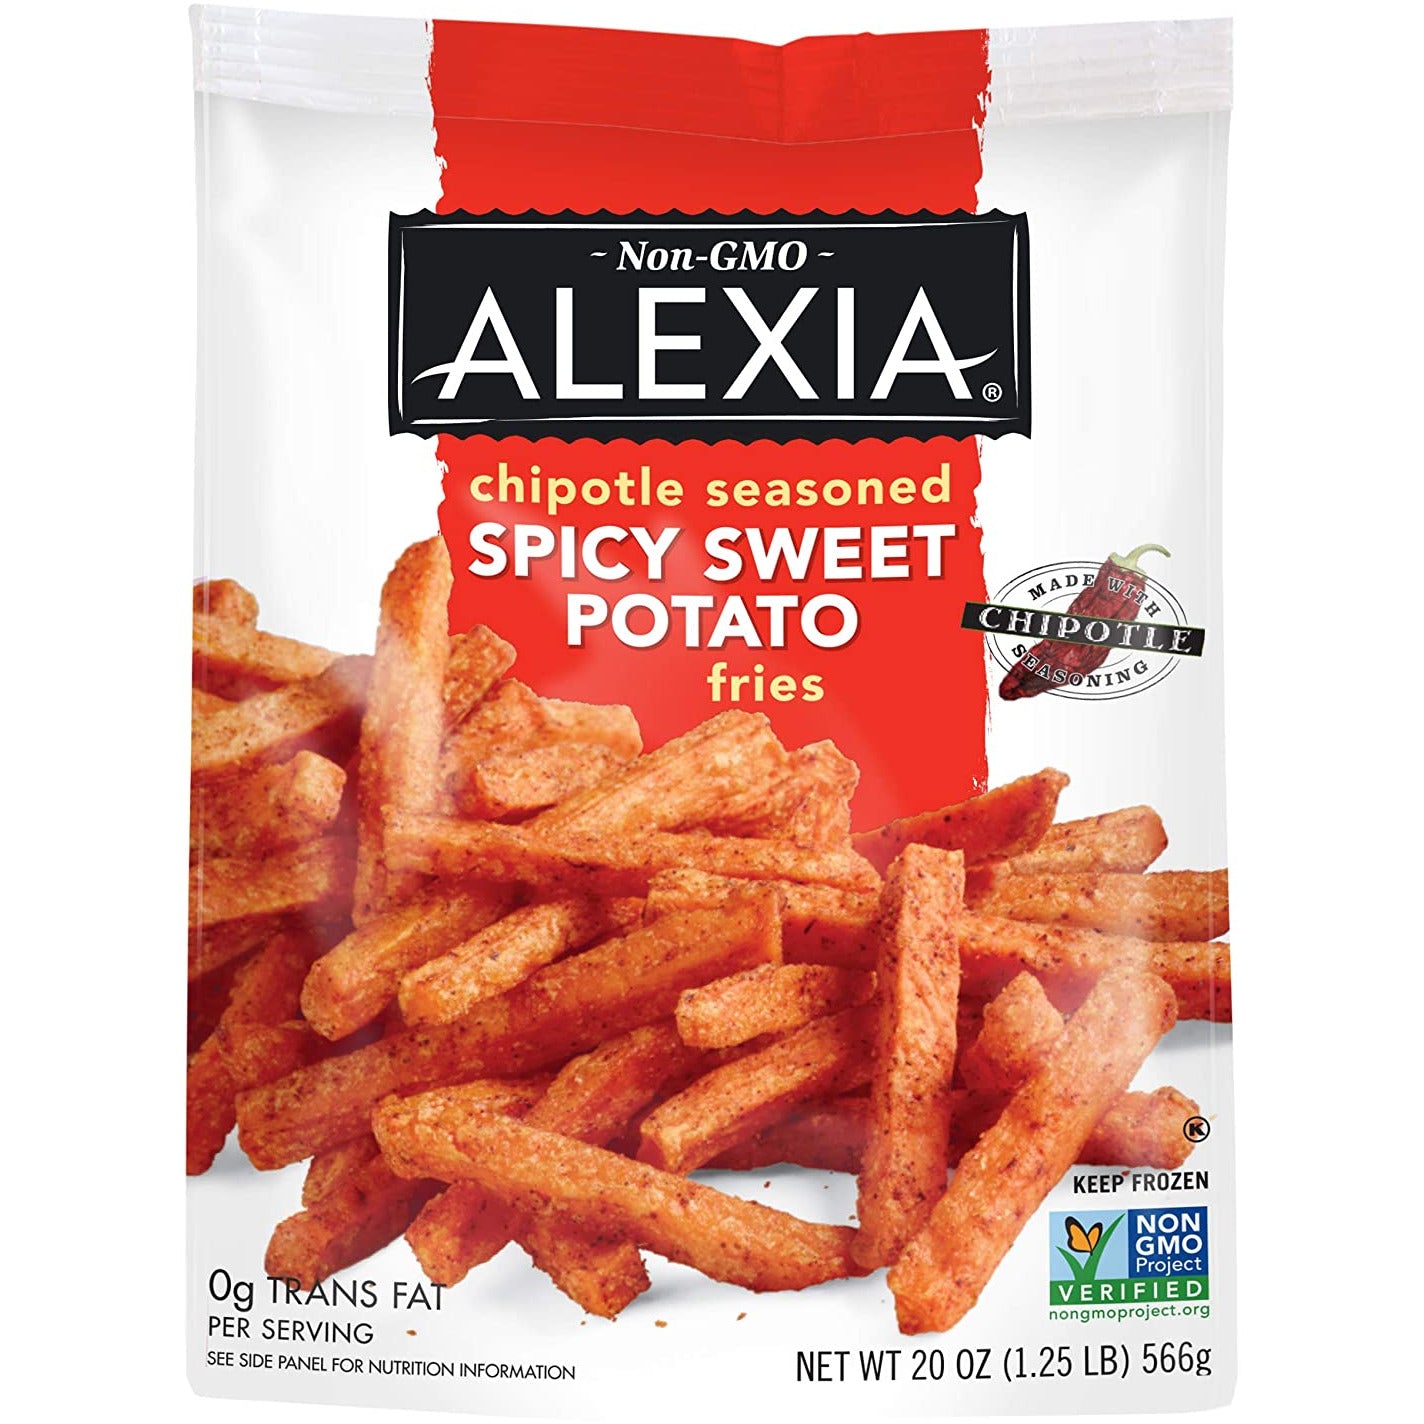 Spicy Sweet Potato Julienne Fries with Chipotle Seasoning, 20oz